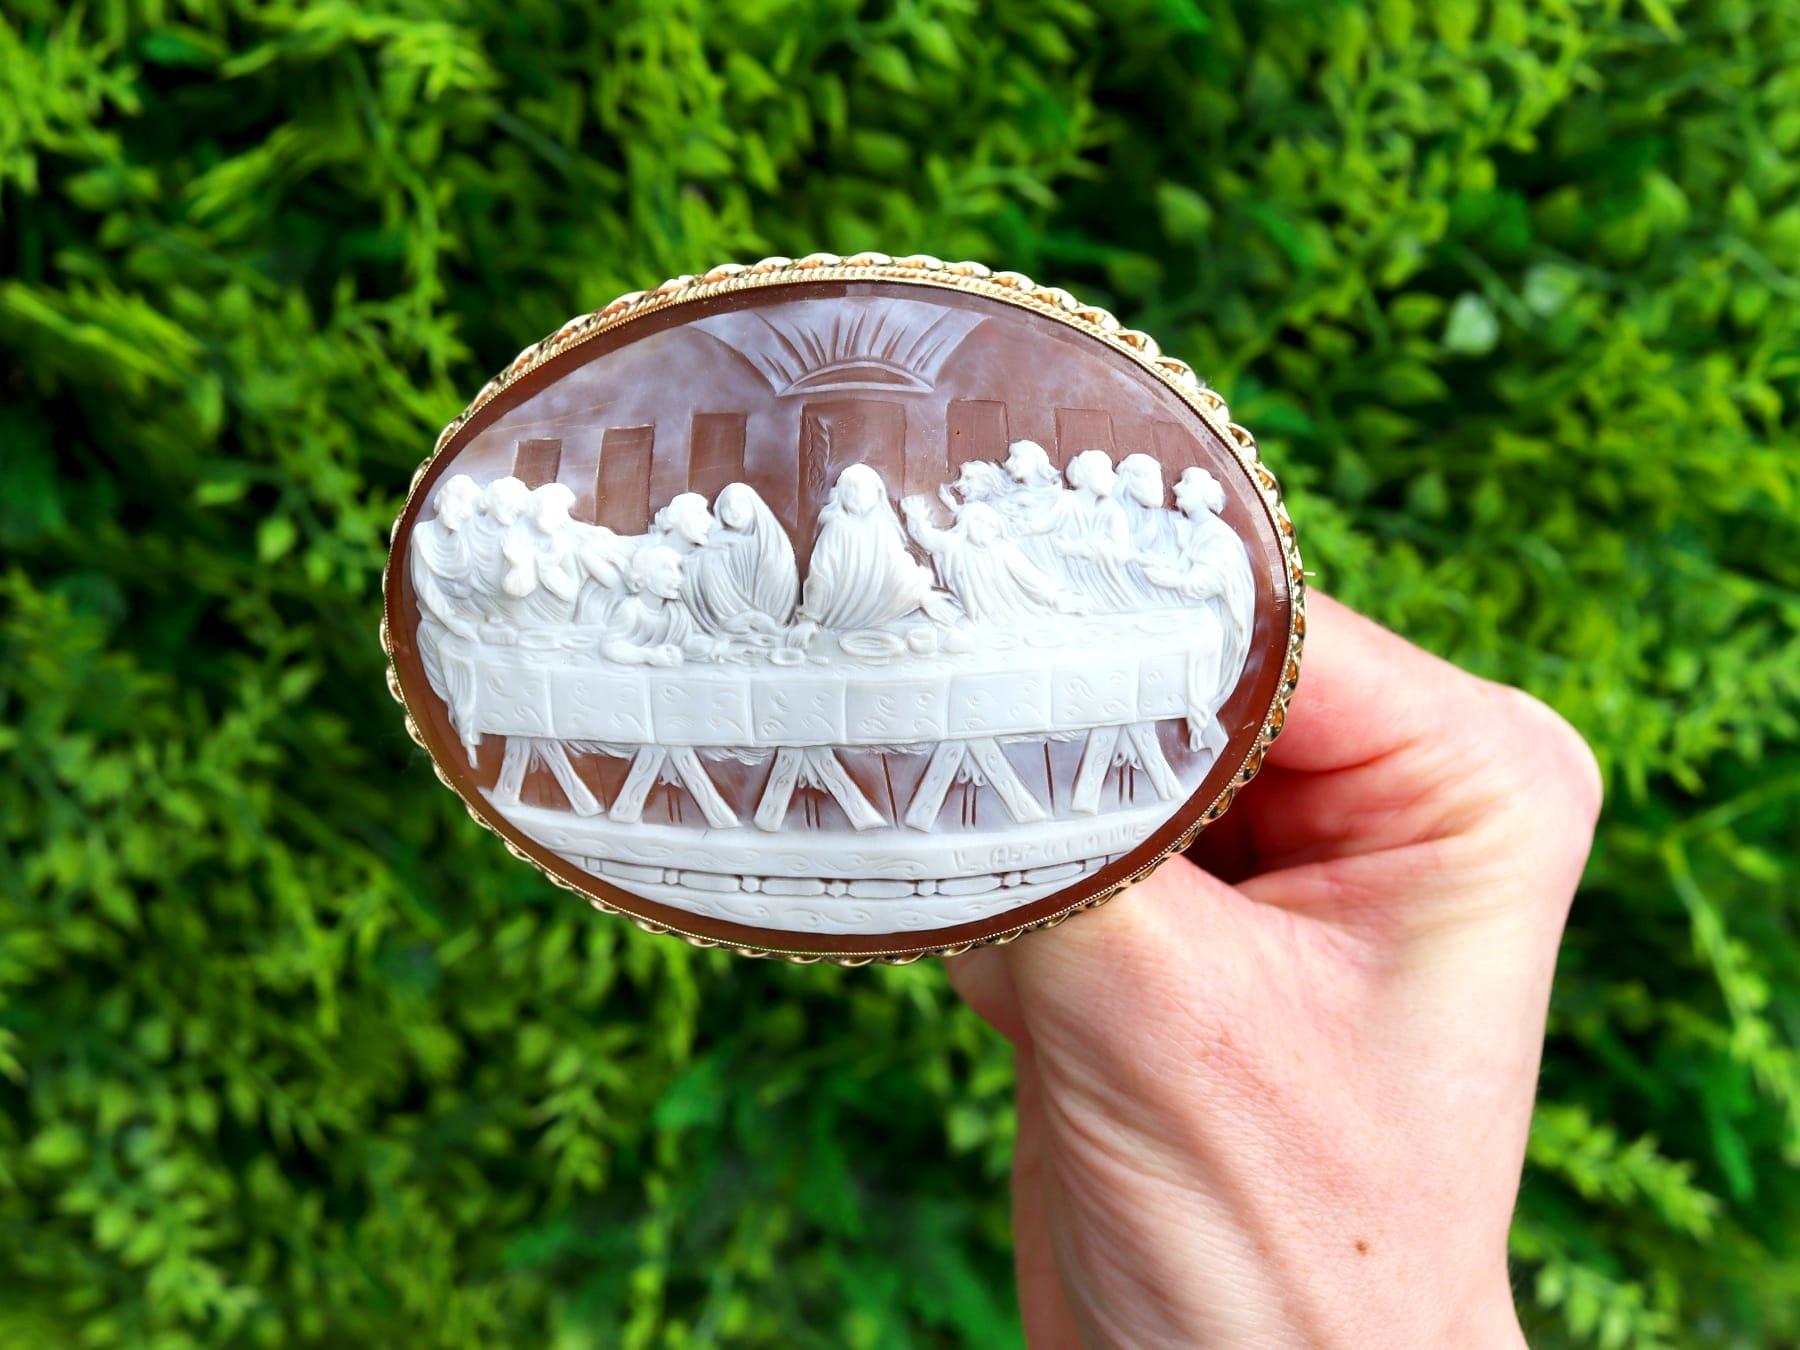 An exceptional, fine and impressive, large vintage shell and 9 karat yellow gold cameo brooch depicting the Last Supper; part of our cameo jewelry collections.

This exceptional and large vintage brooch has been crafted in 9k yellow gold.

The oval